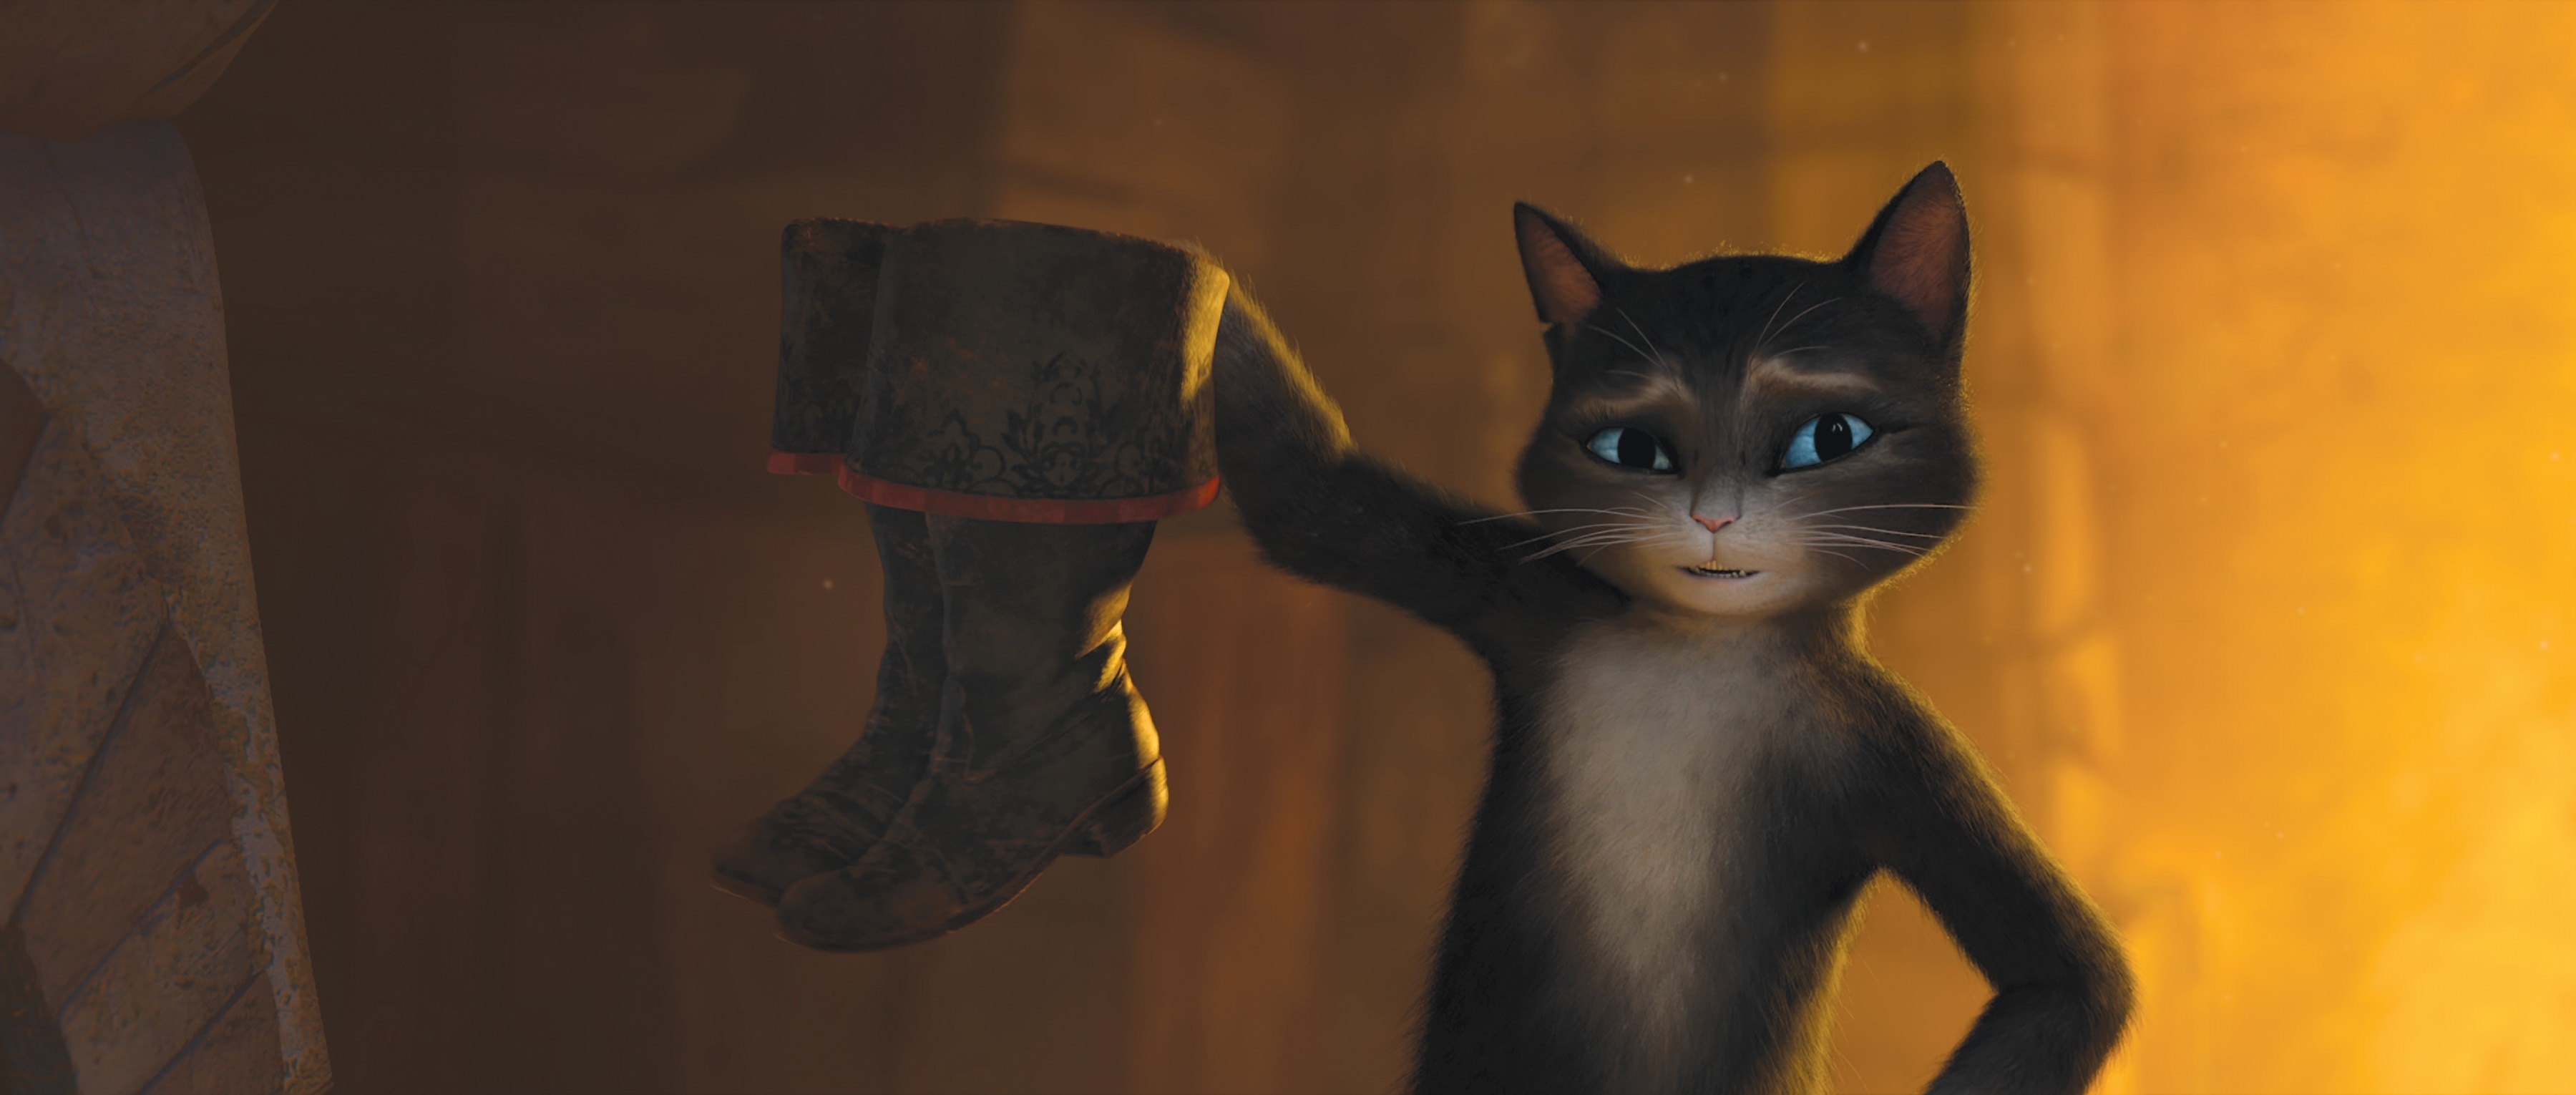 puss in boots, movie Aesthetic wallpaper